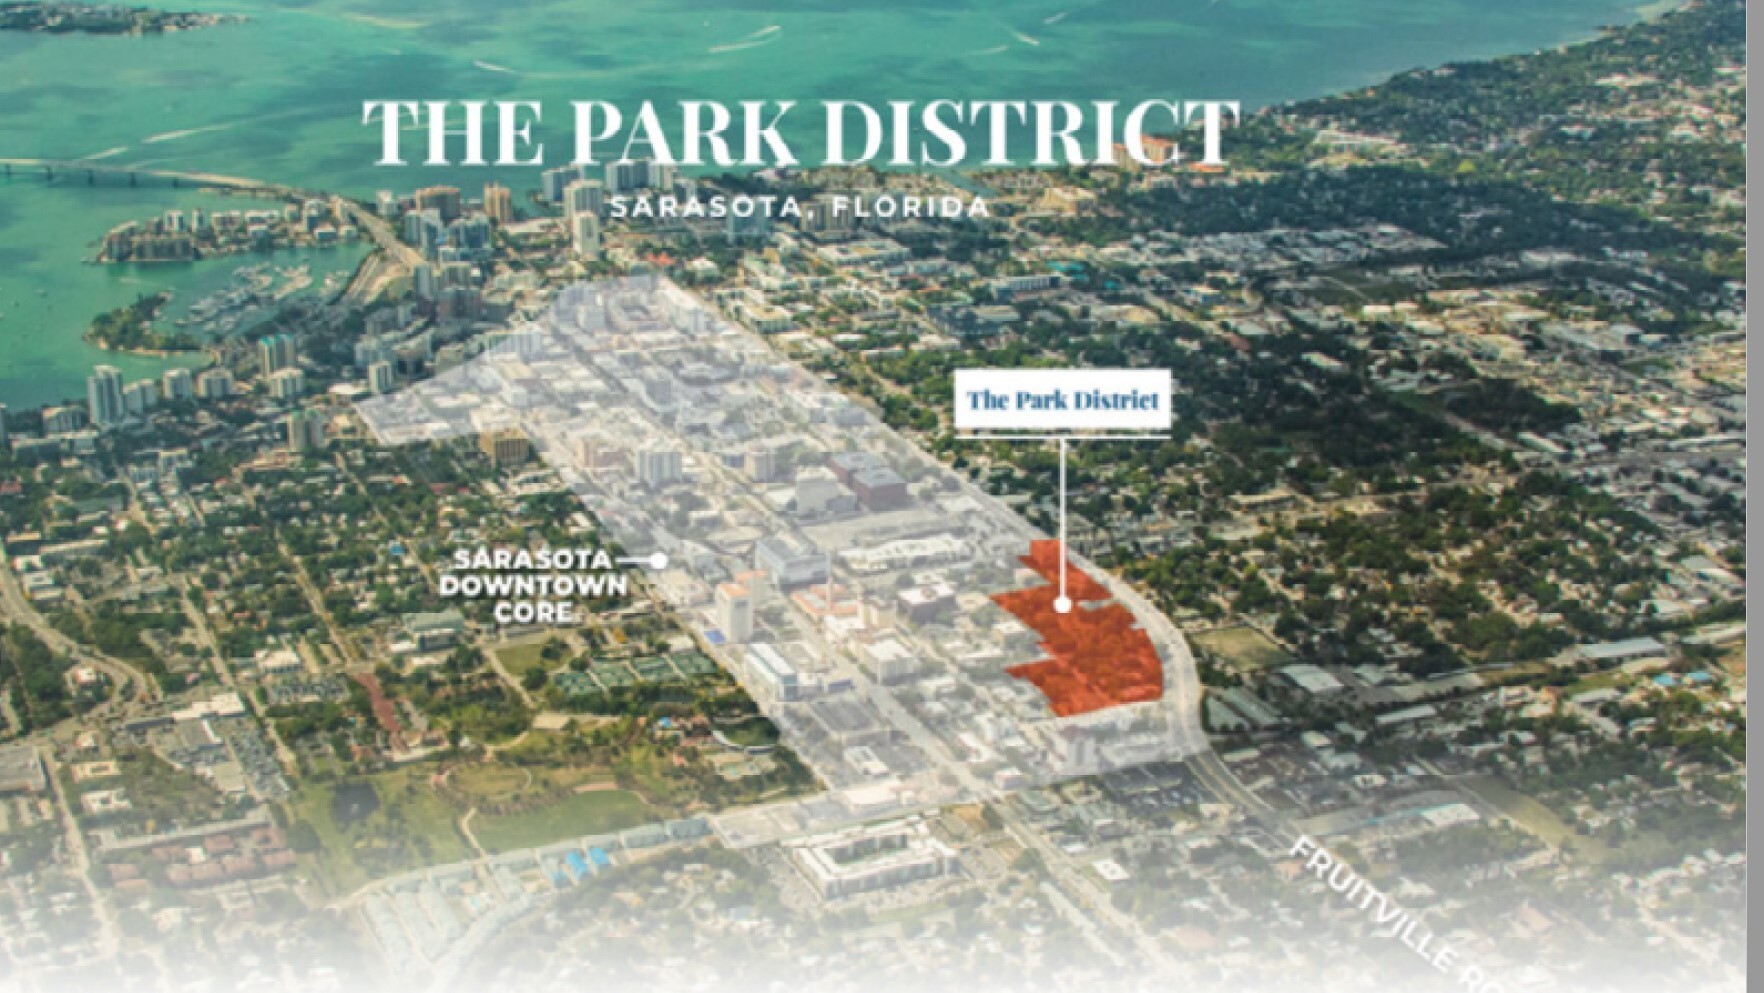 Park District is being spearheaded by the Atlanta multifamily development firm Brook Farm Group, which has bought nearly 9 acres in downtown Sarasota and plans to build a mixed-use development on the sites. (Courtesy image)